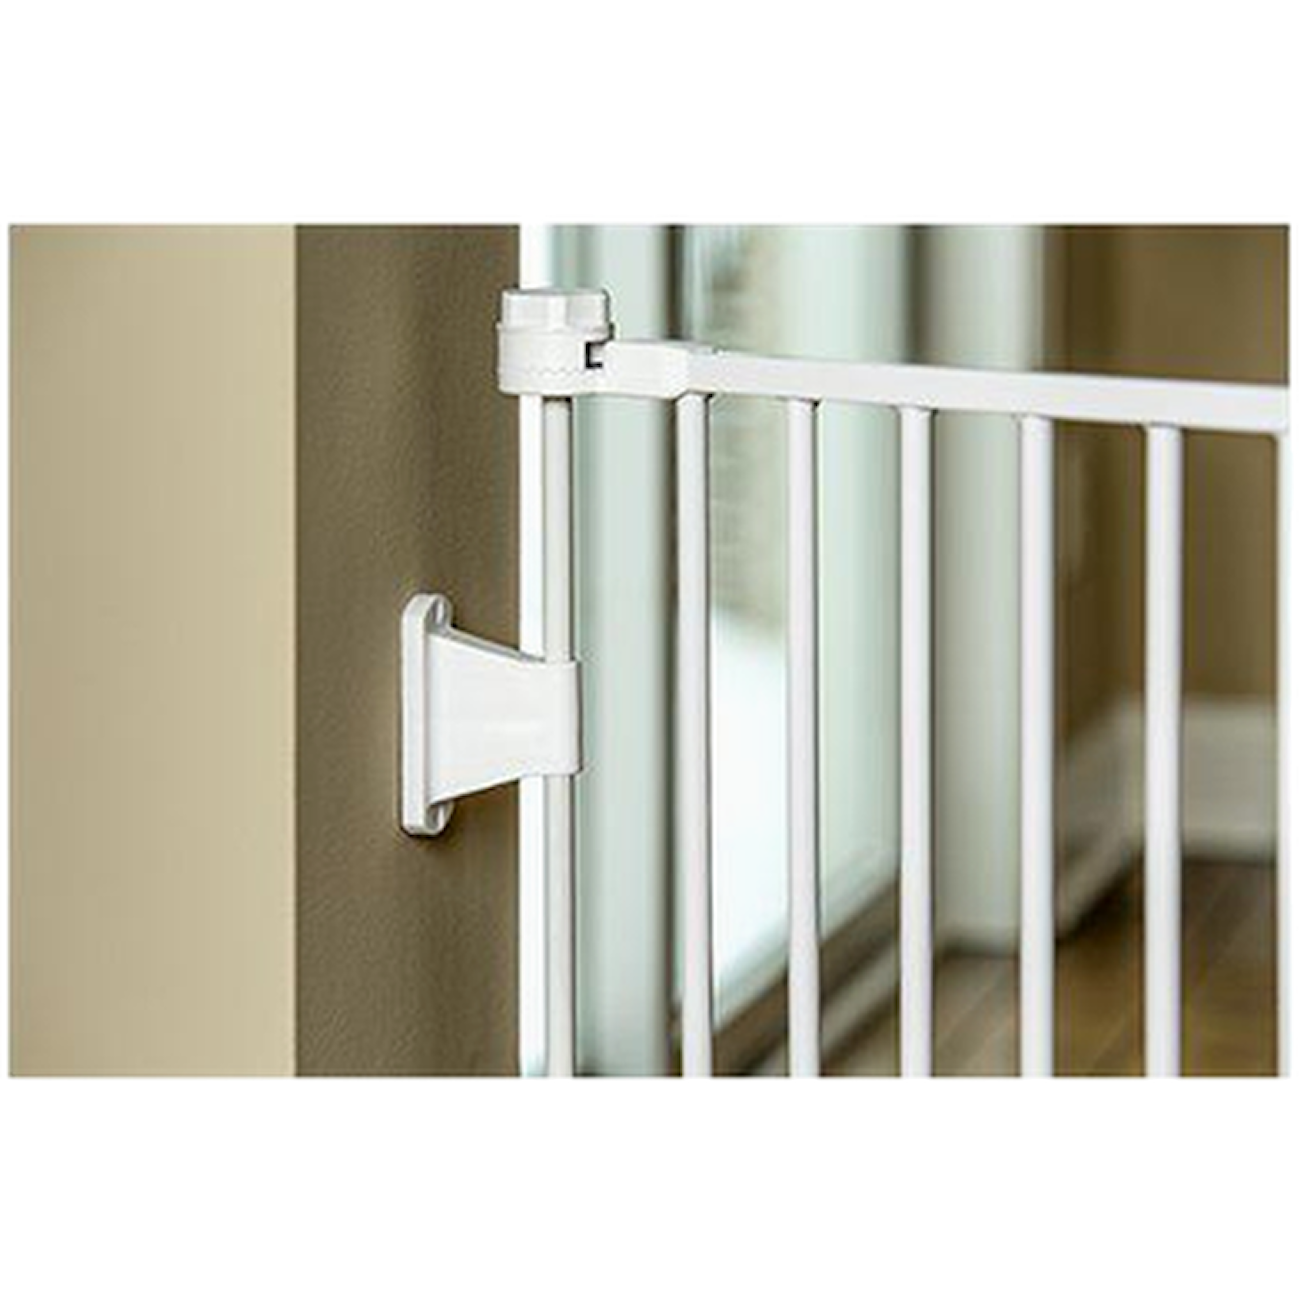 Wall Mounting Hardware Kit for Convertible Pet Yard and Gate White 4-pack